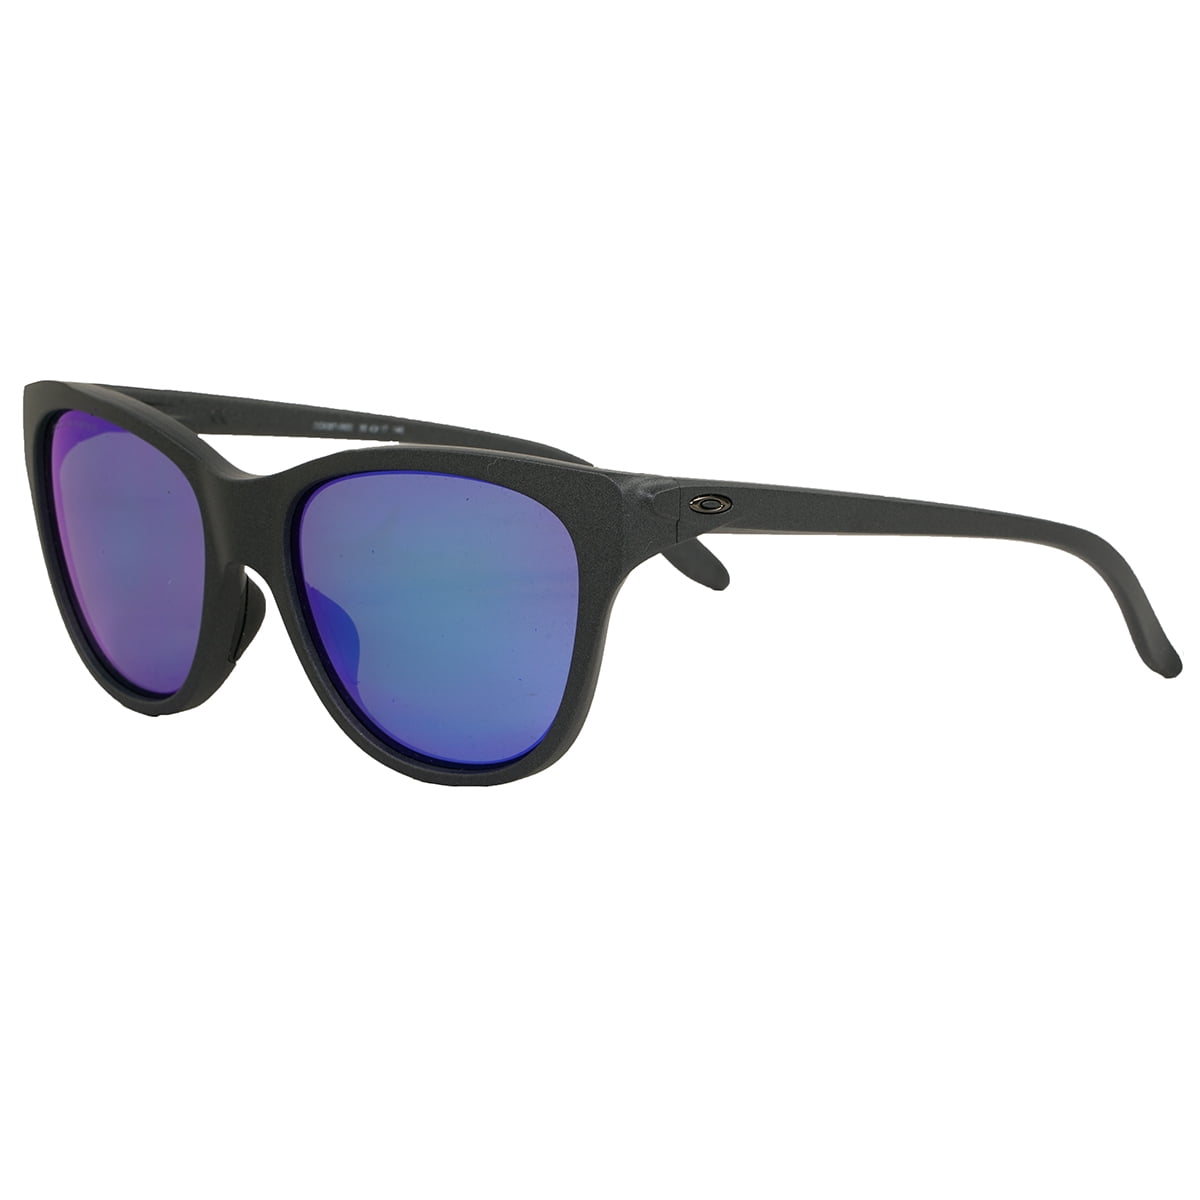 Discover more than 217 cateye oakley womens sunglasses